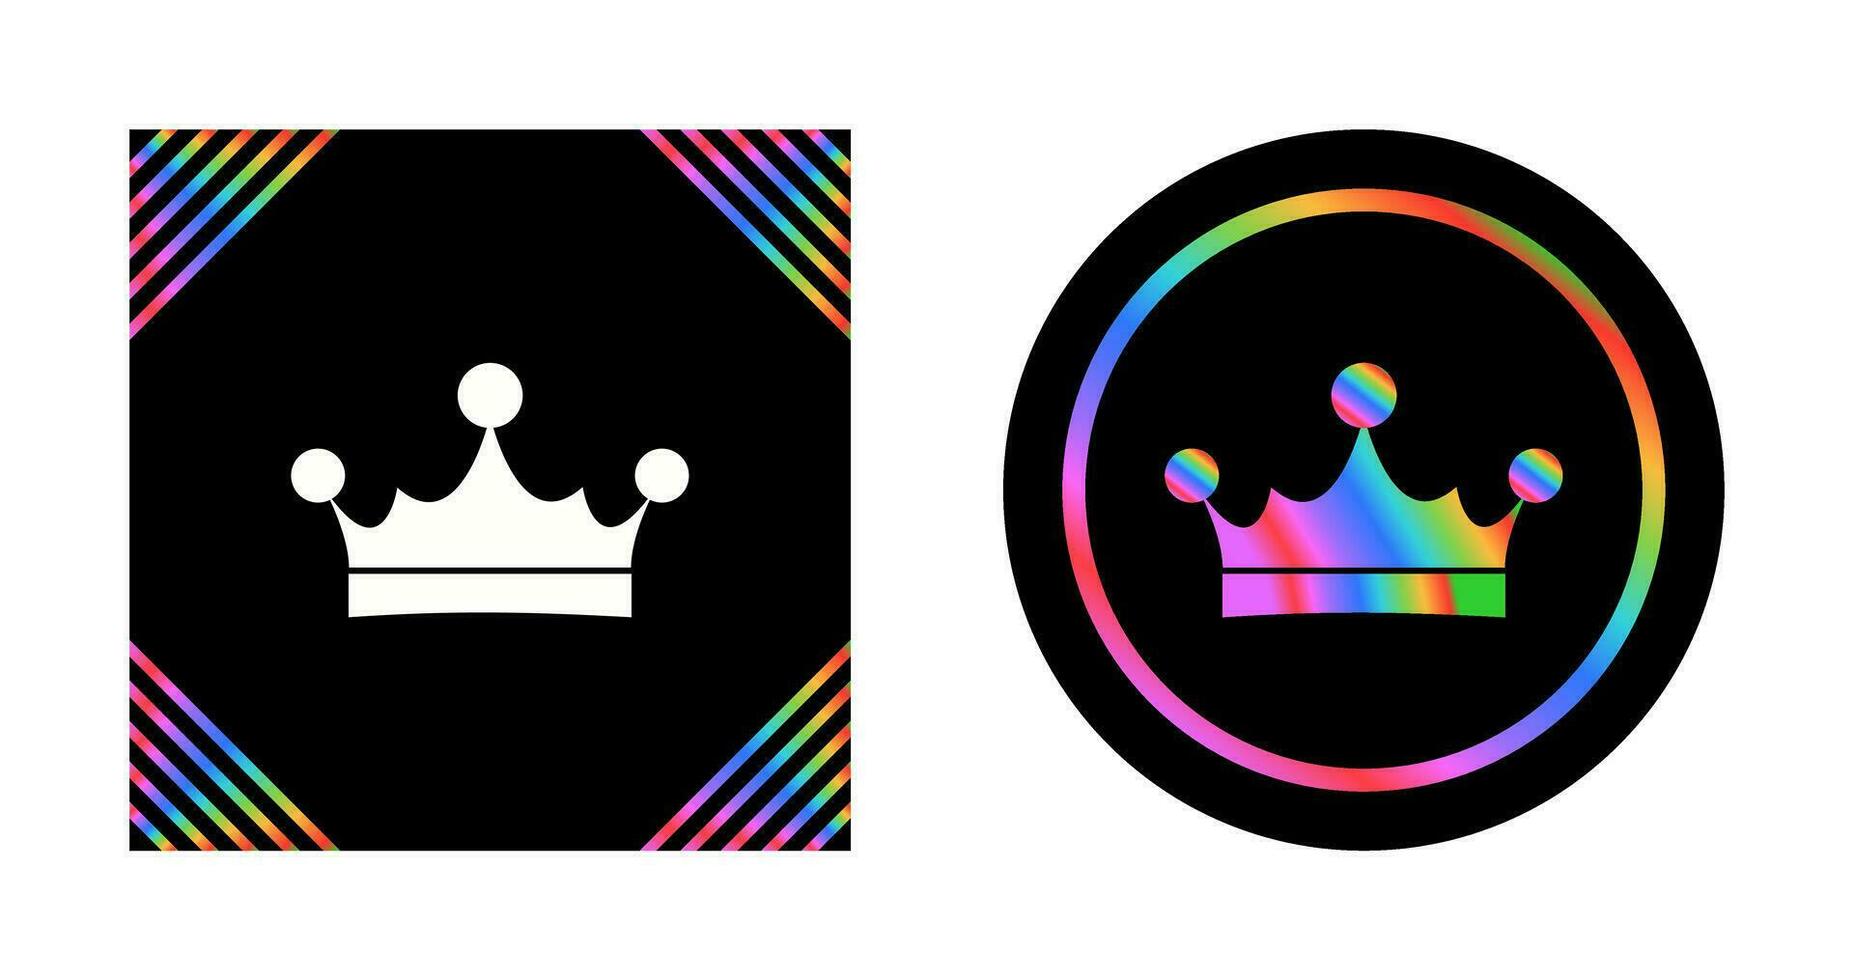 King's Crown Vector Icon